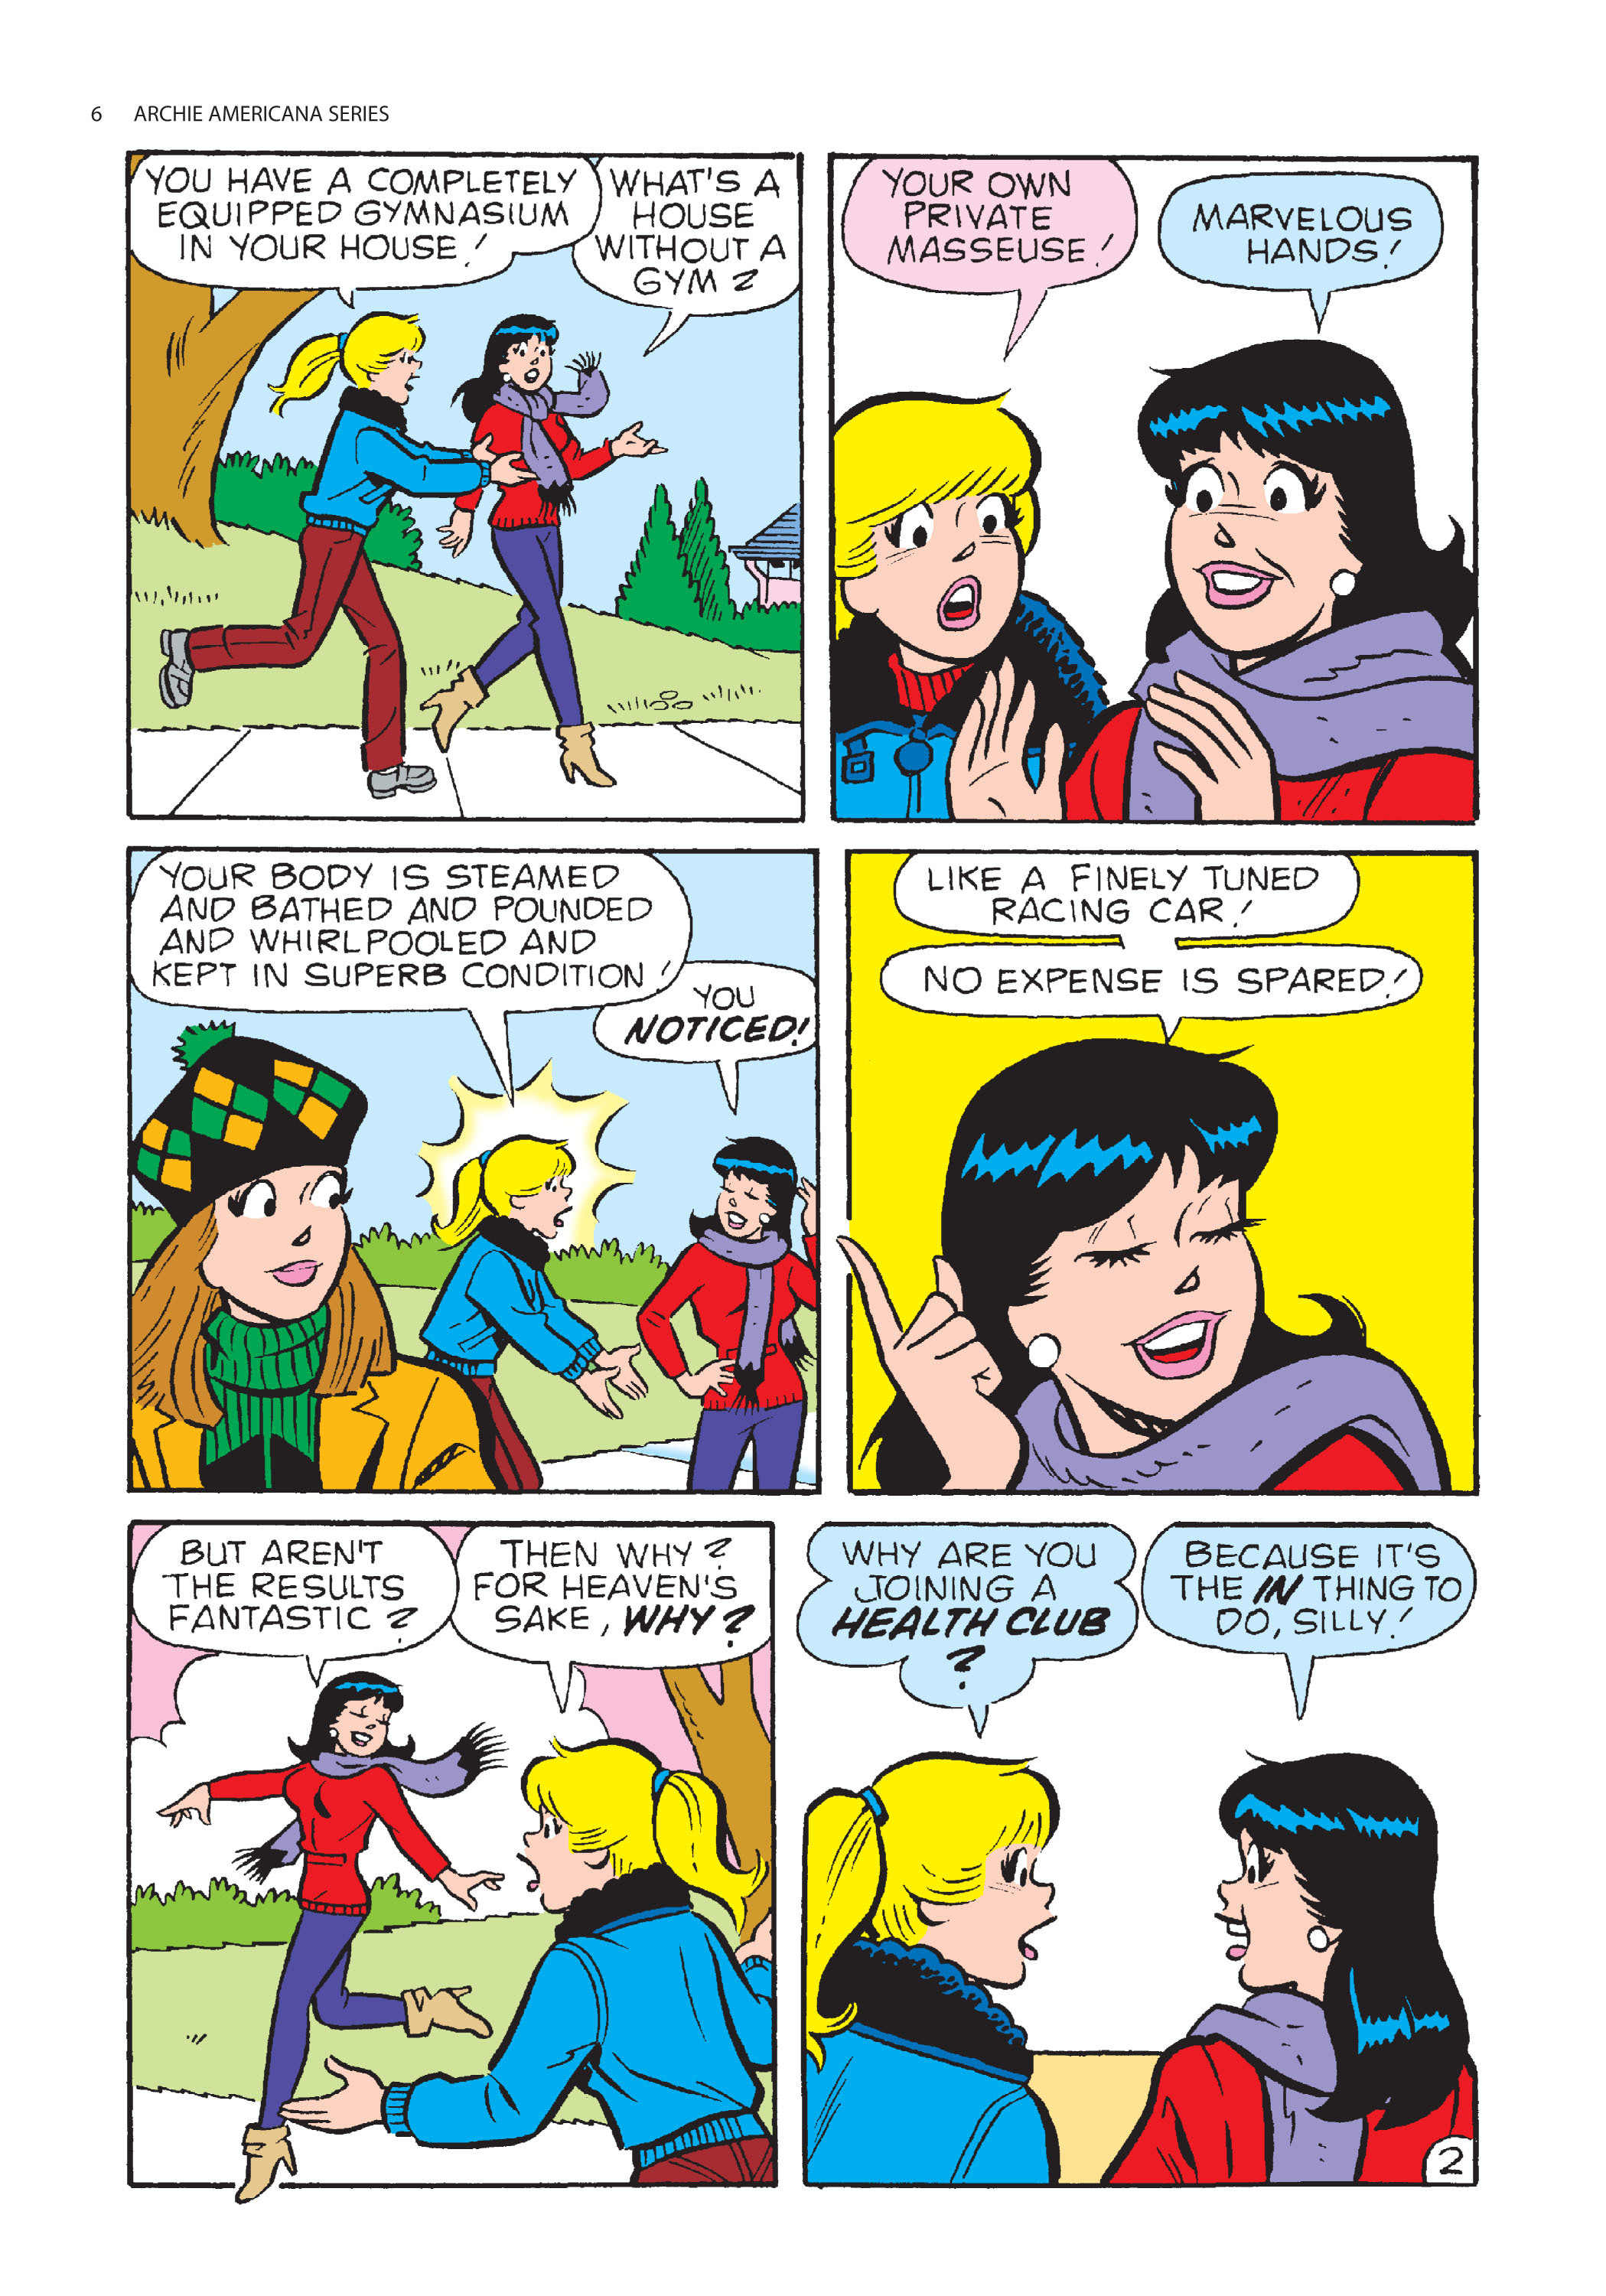 Read online Archie Americana Series comic -  Issue # TPB 11 - 8